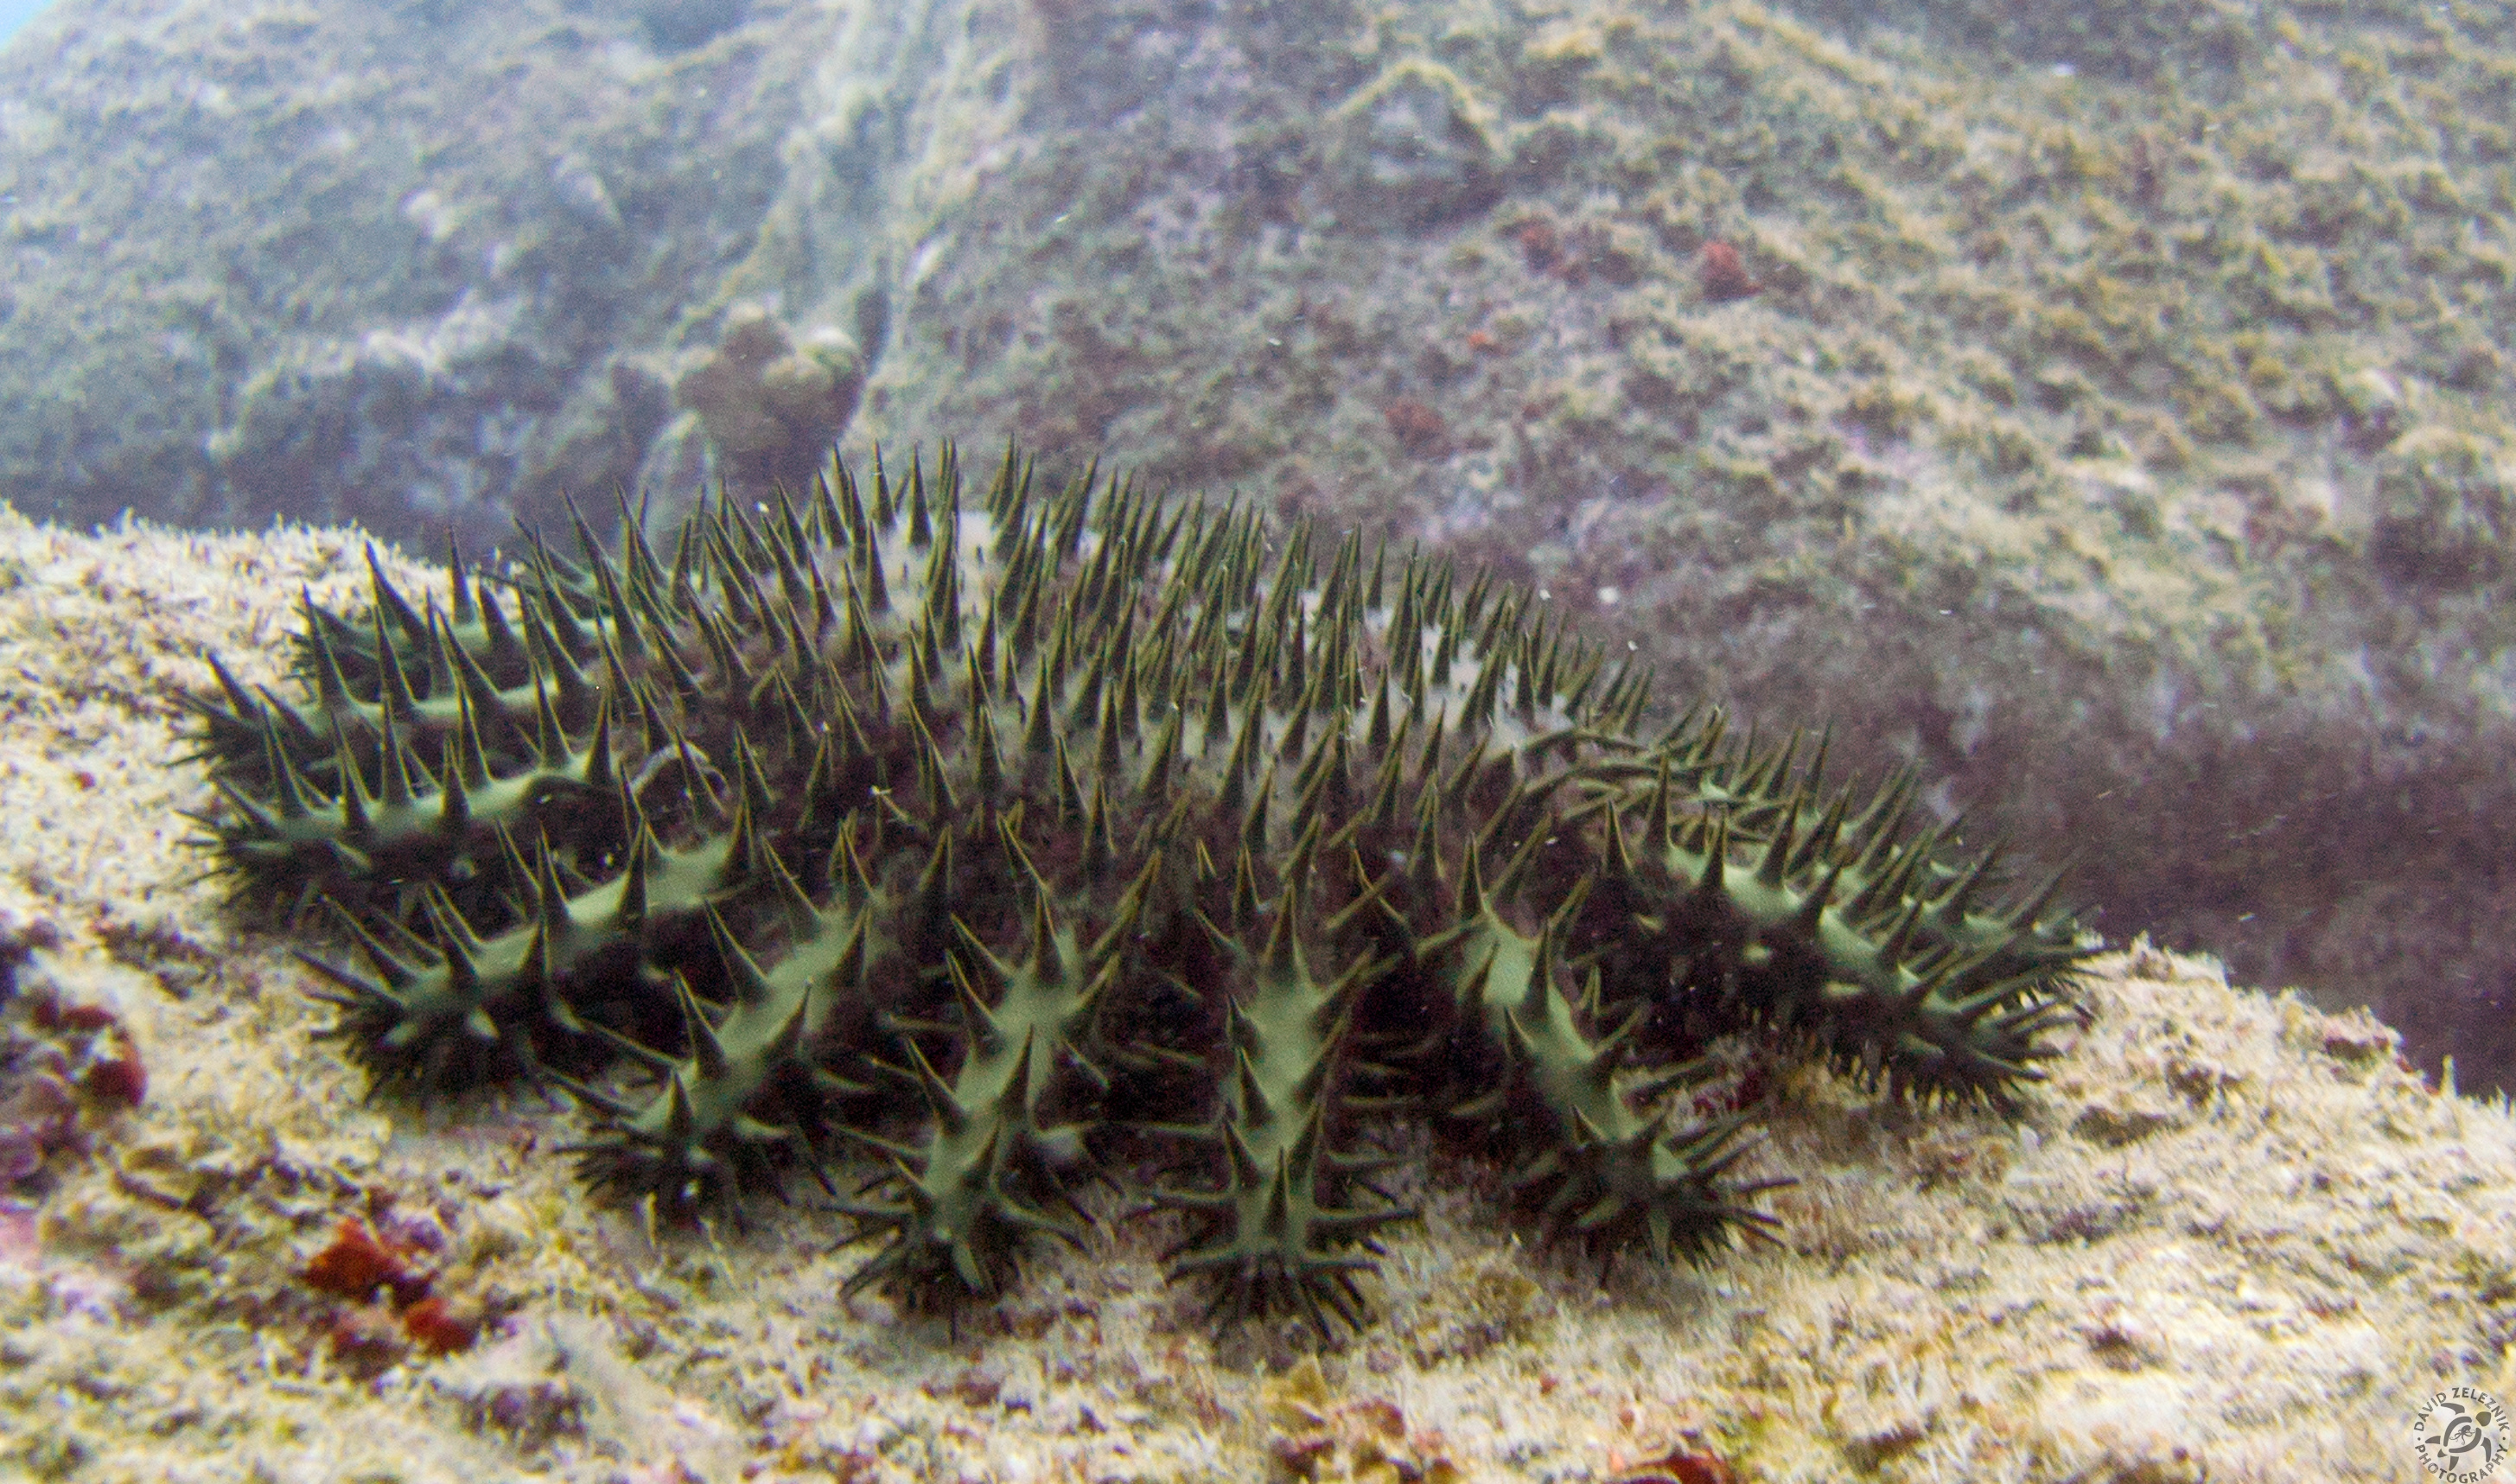 Crown-of-Thorns star